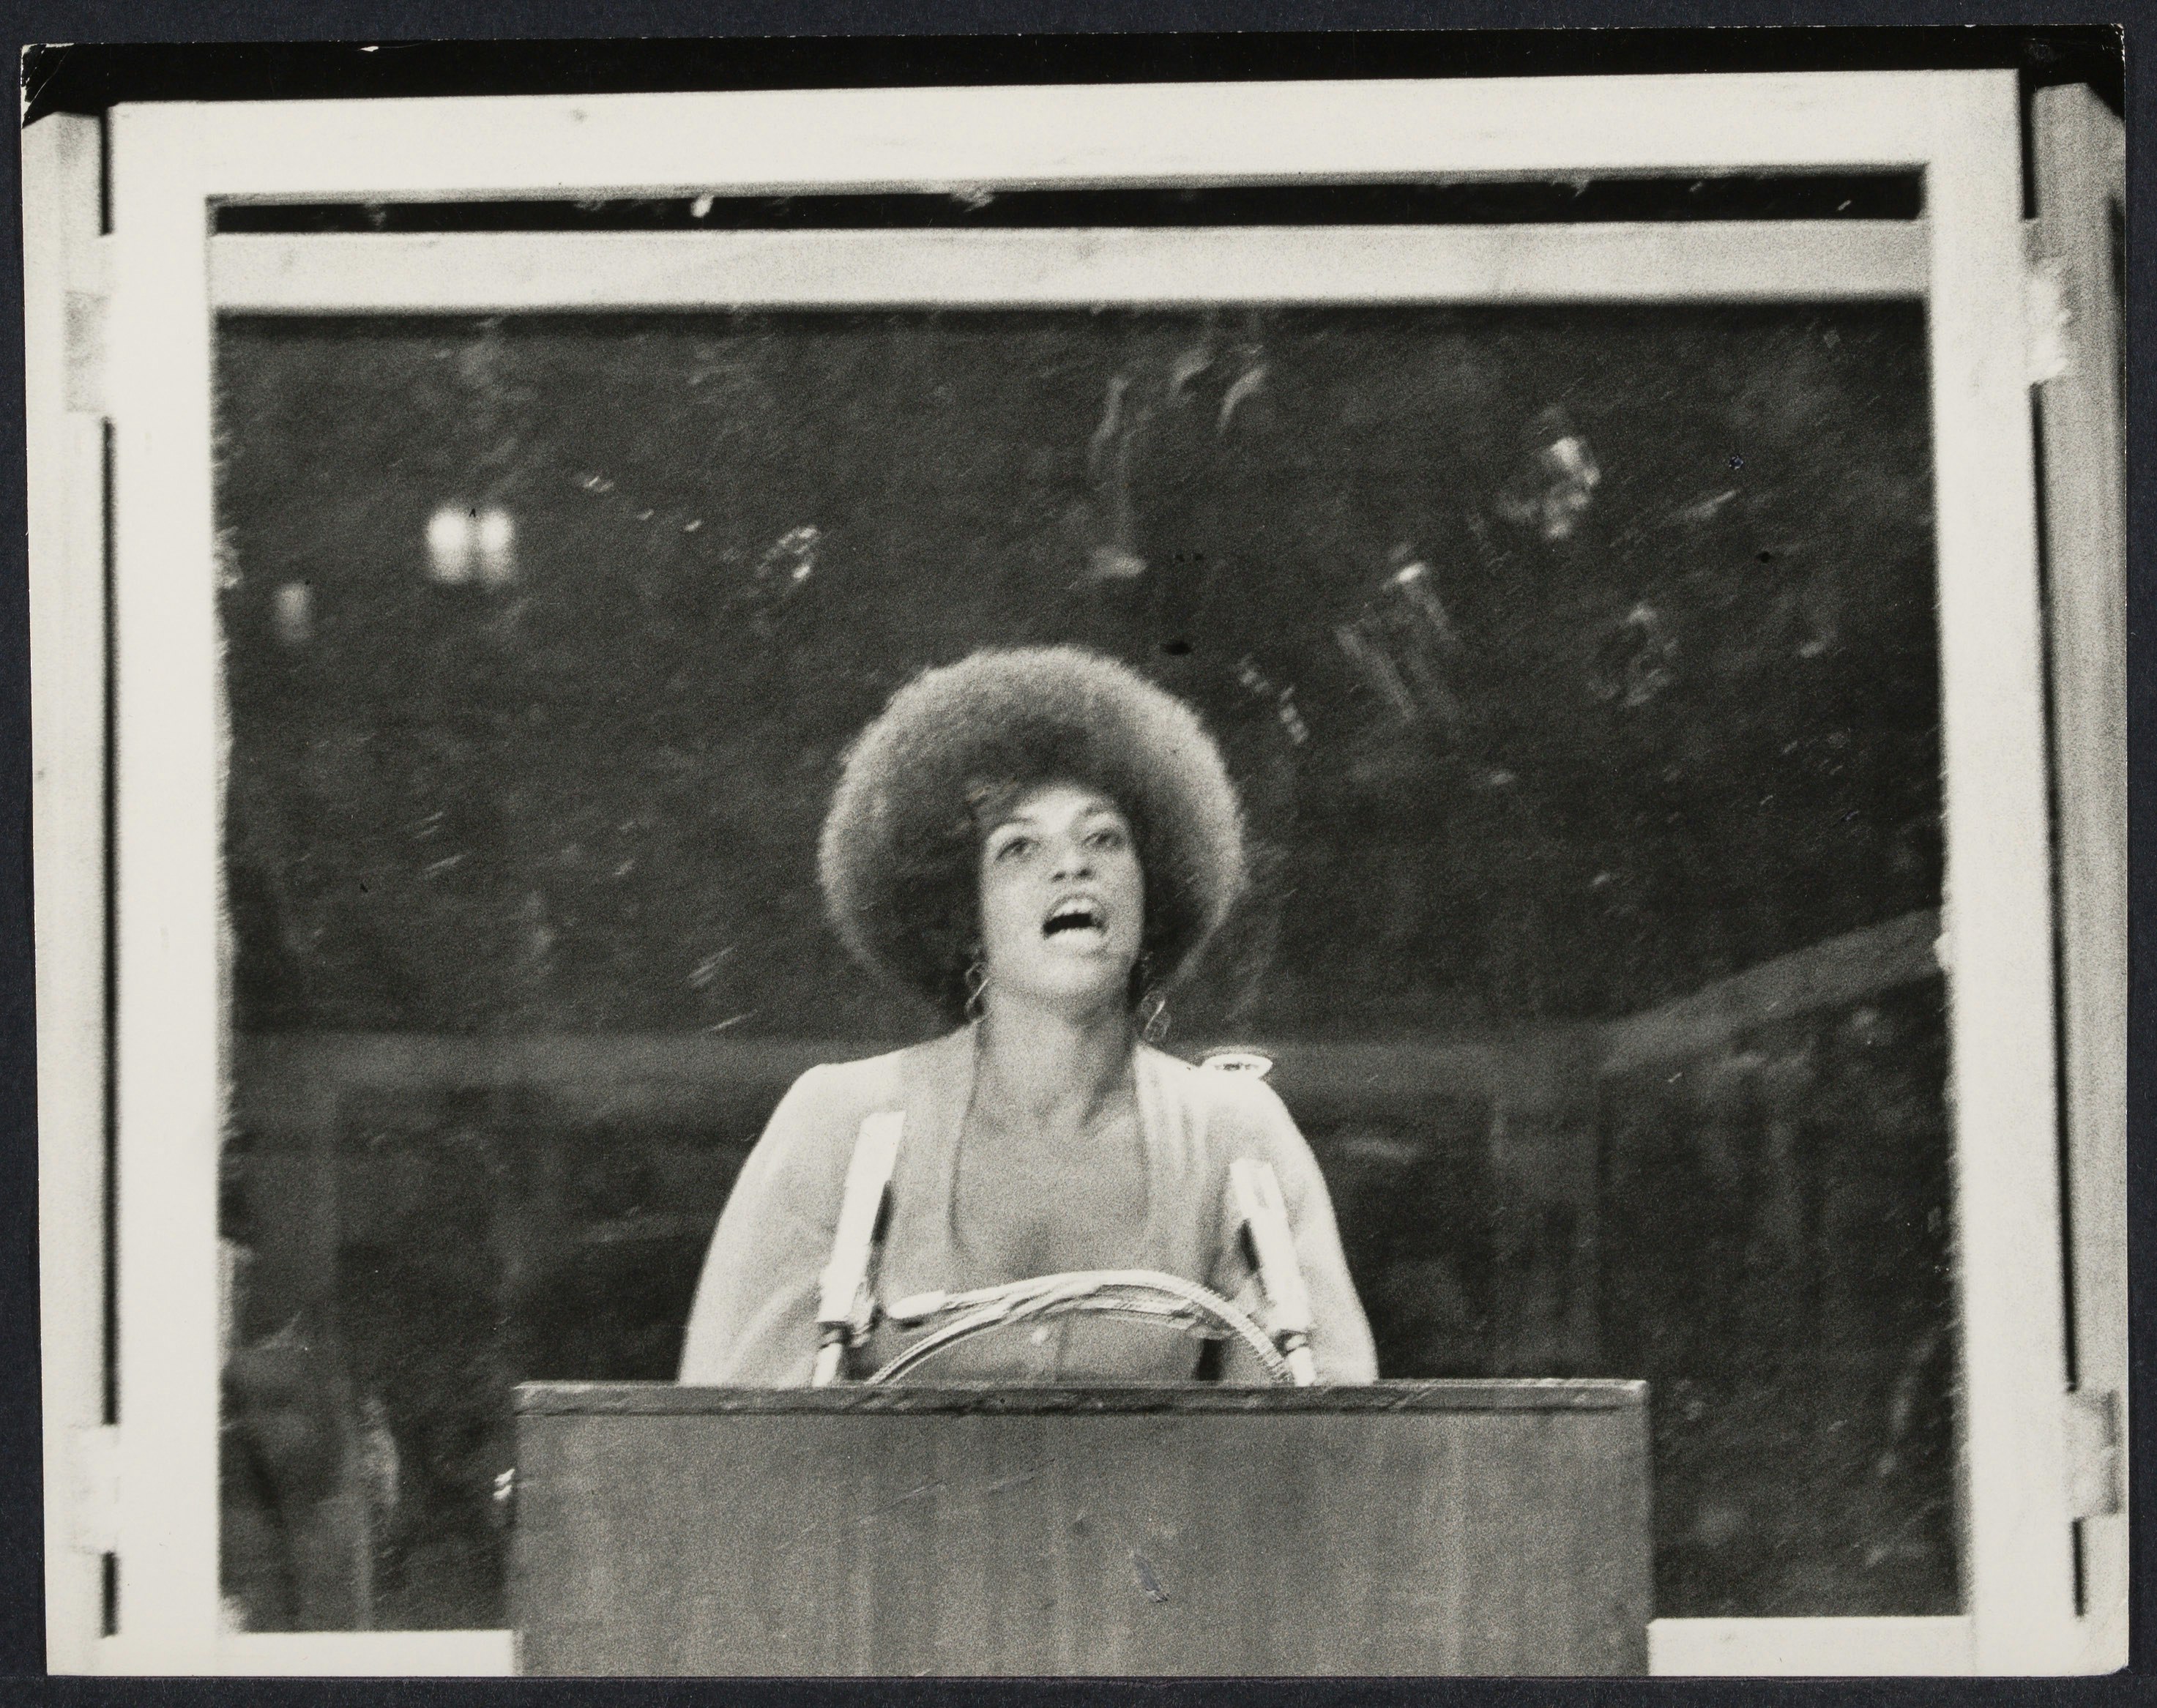 Bullet proof cage surrounds Angela Davis as she performs in "Night with Angela Davis" at Madison Square Garden